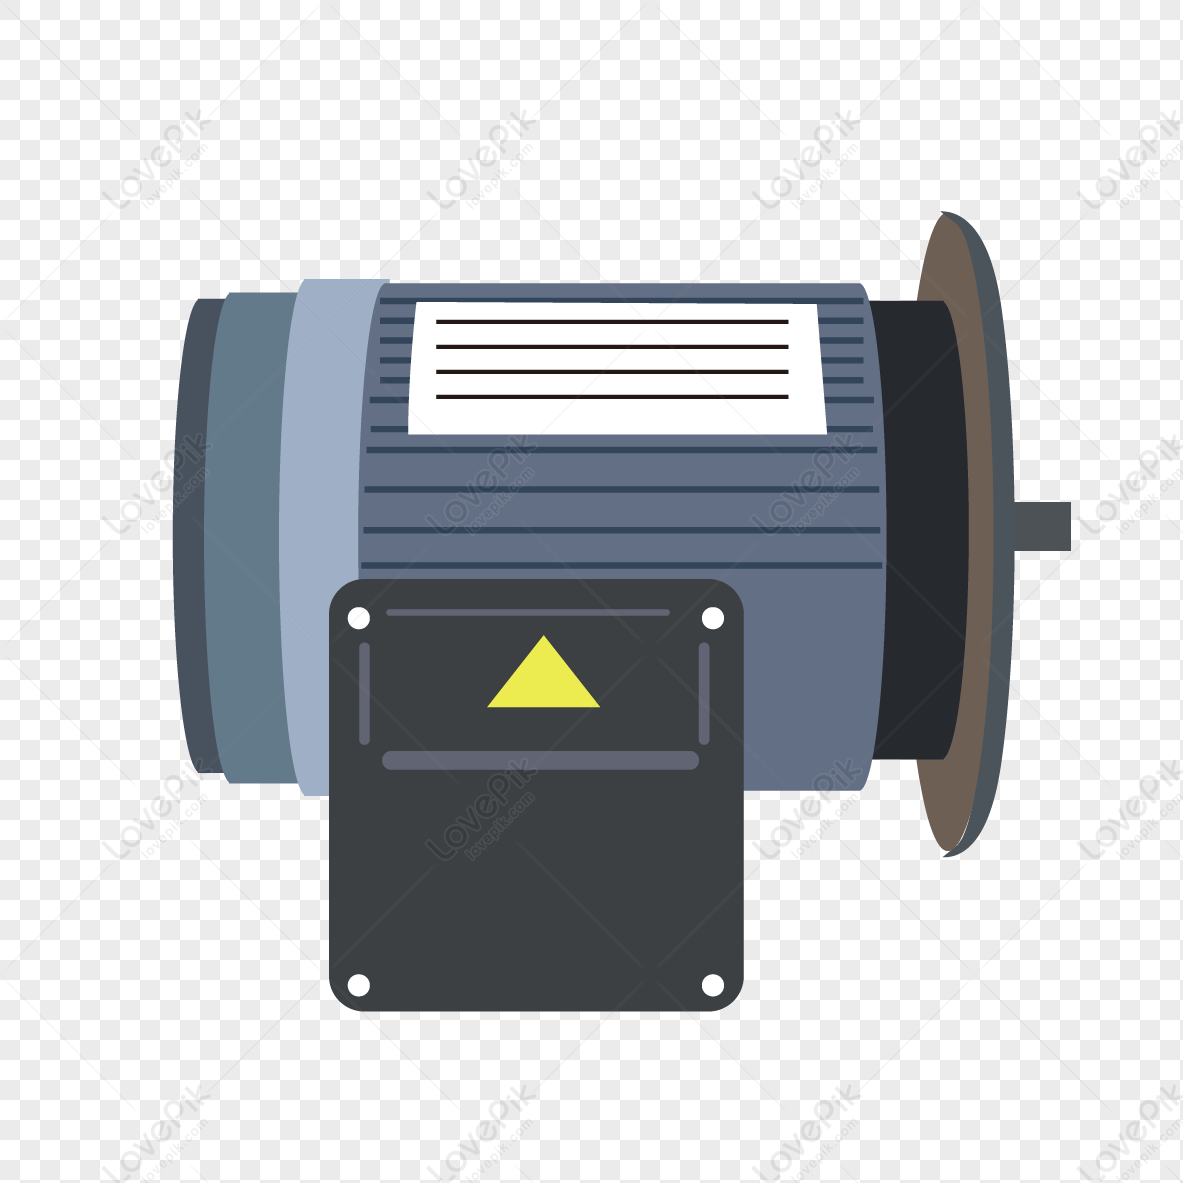 Motor PNG Picture And Clipart Image For Free Download - Lovepik | 401694955